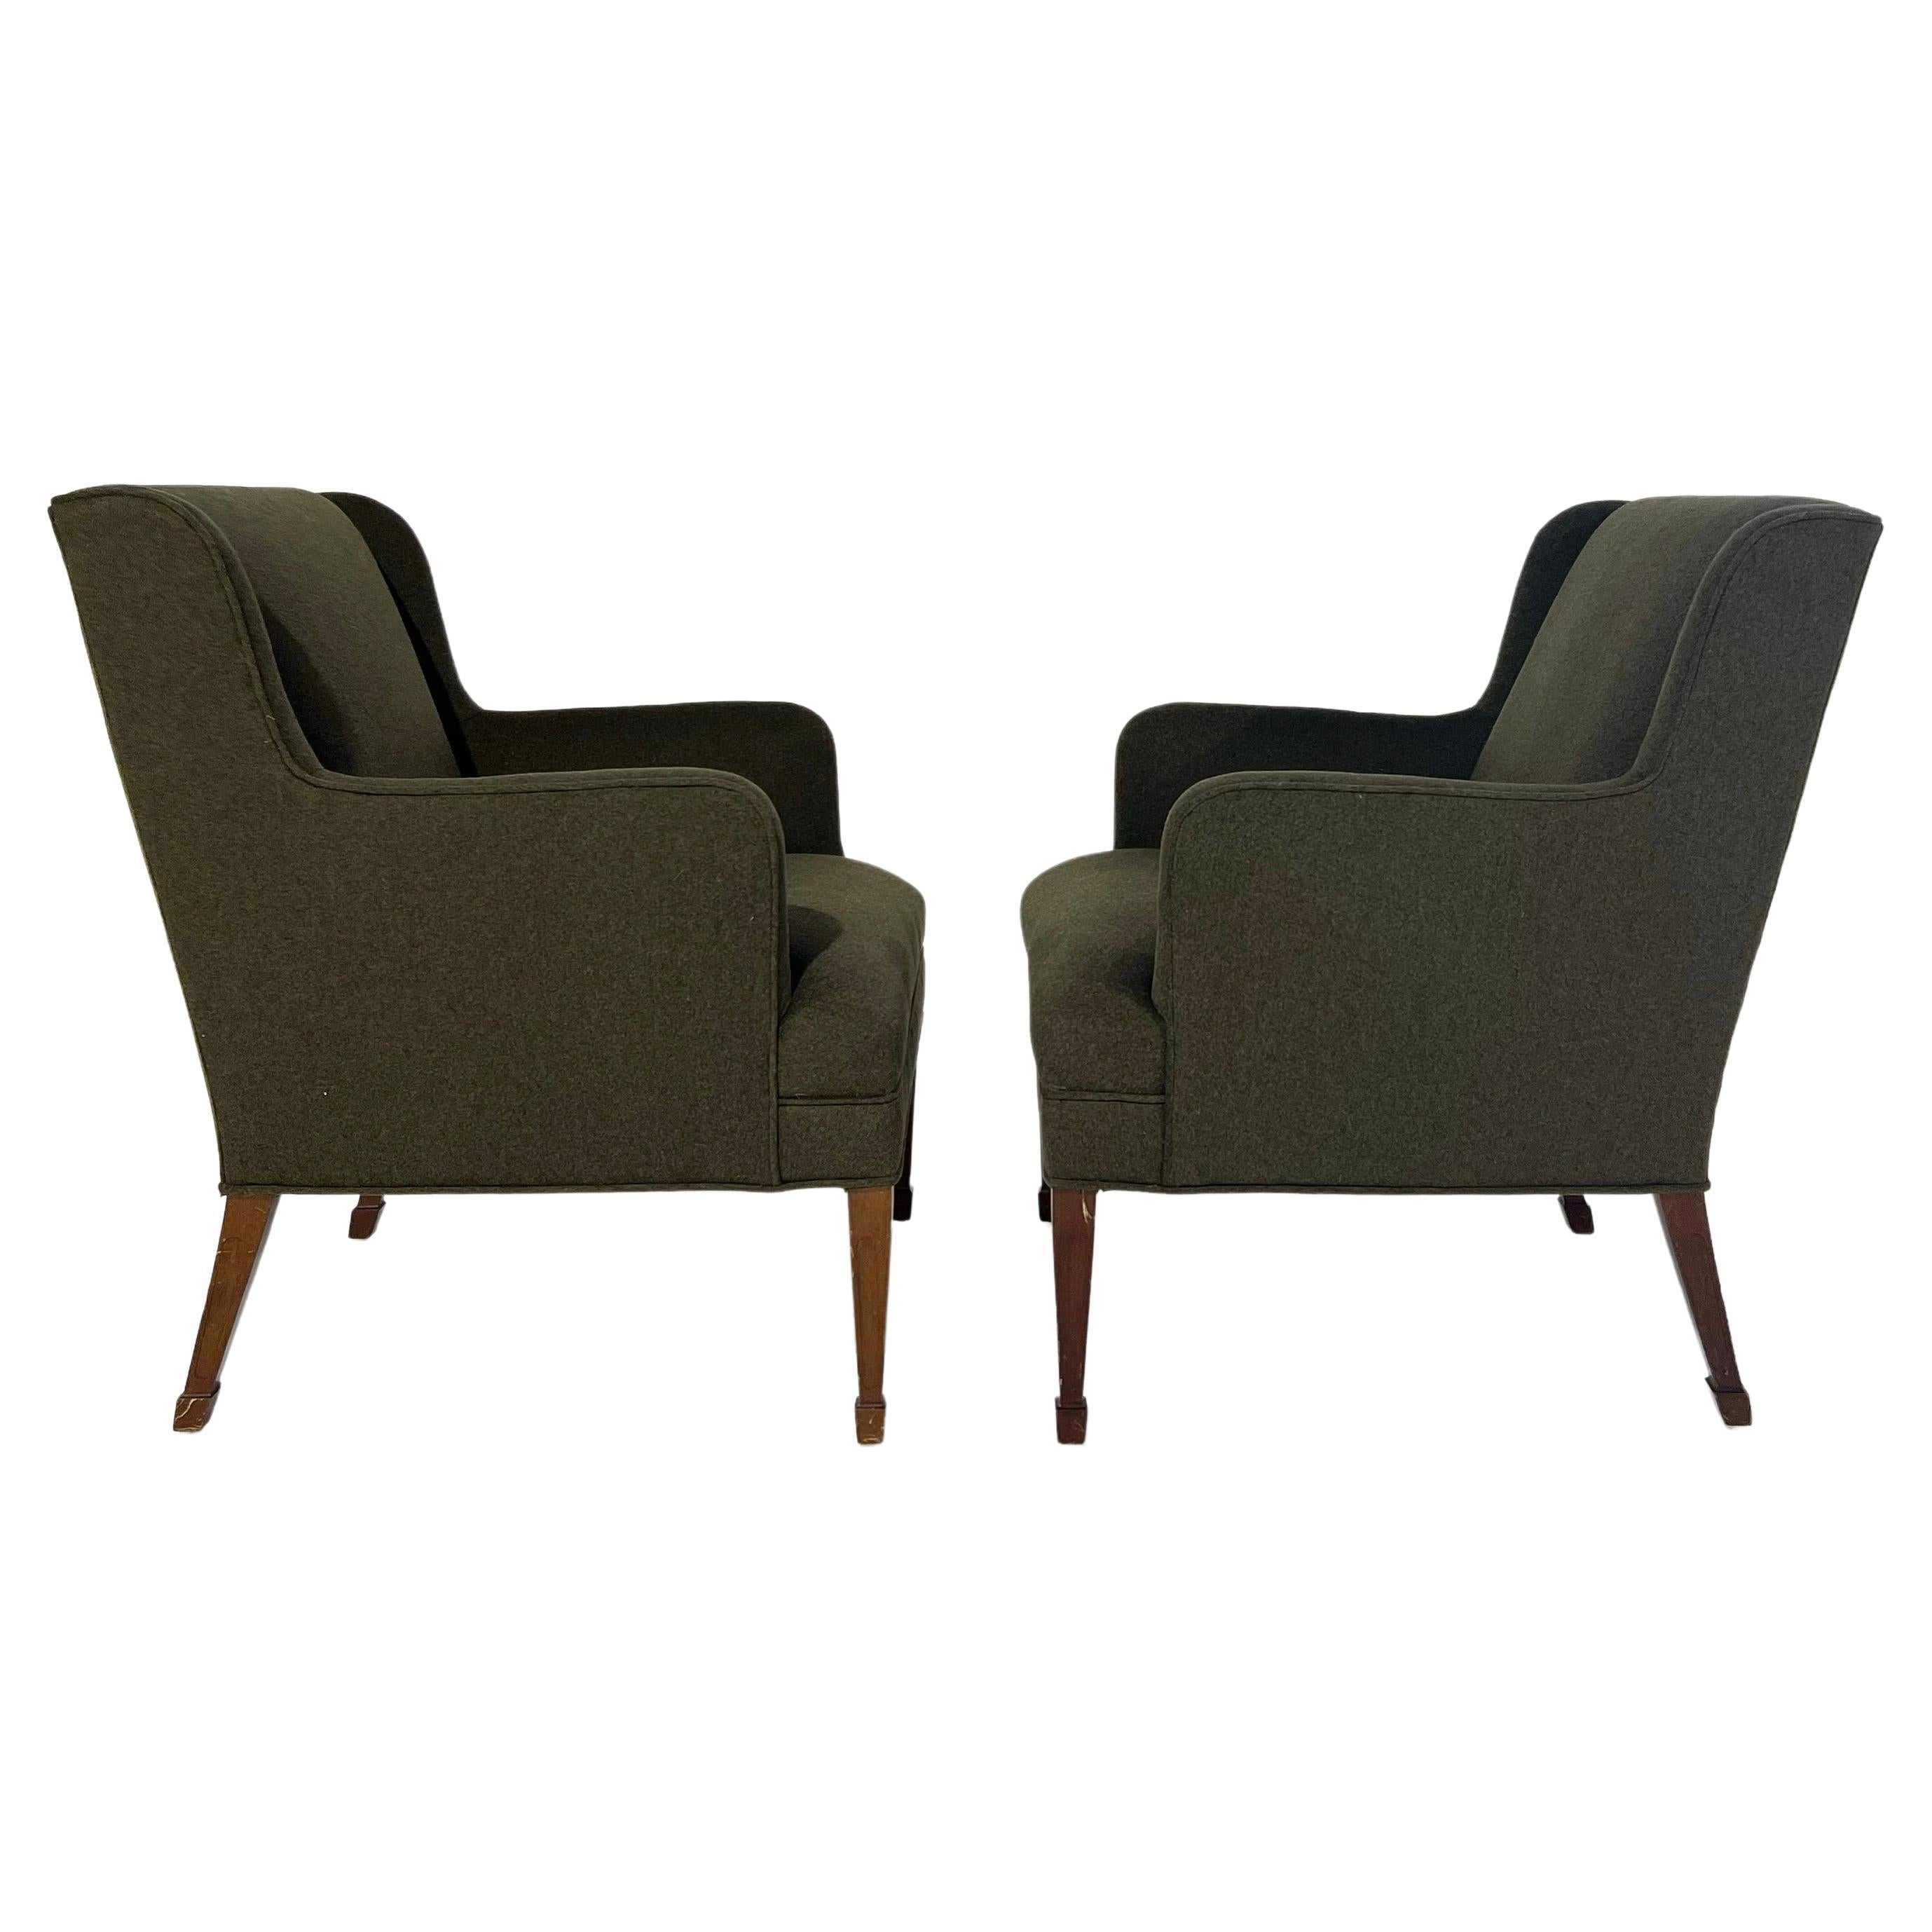 Frits Henningsen Armchairs in Loro Piana Cashmere Wool